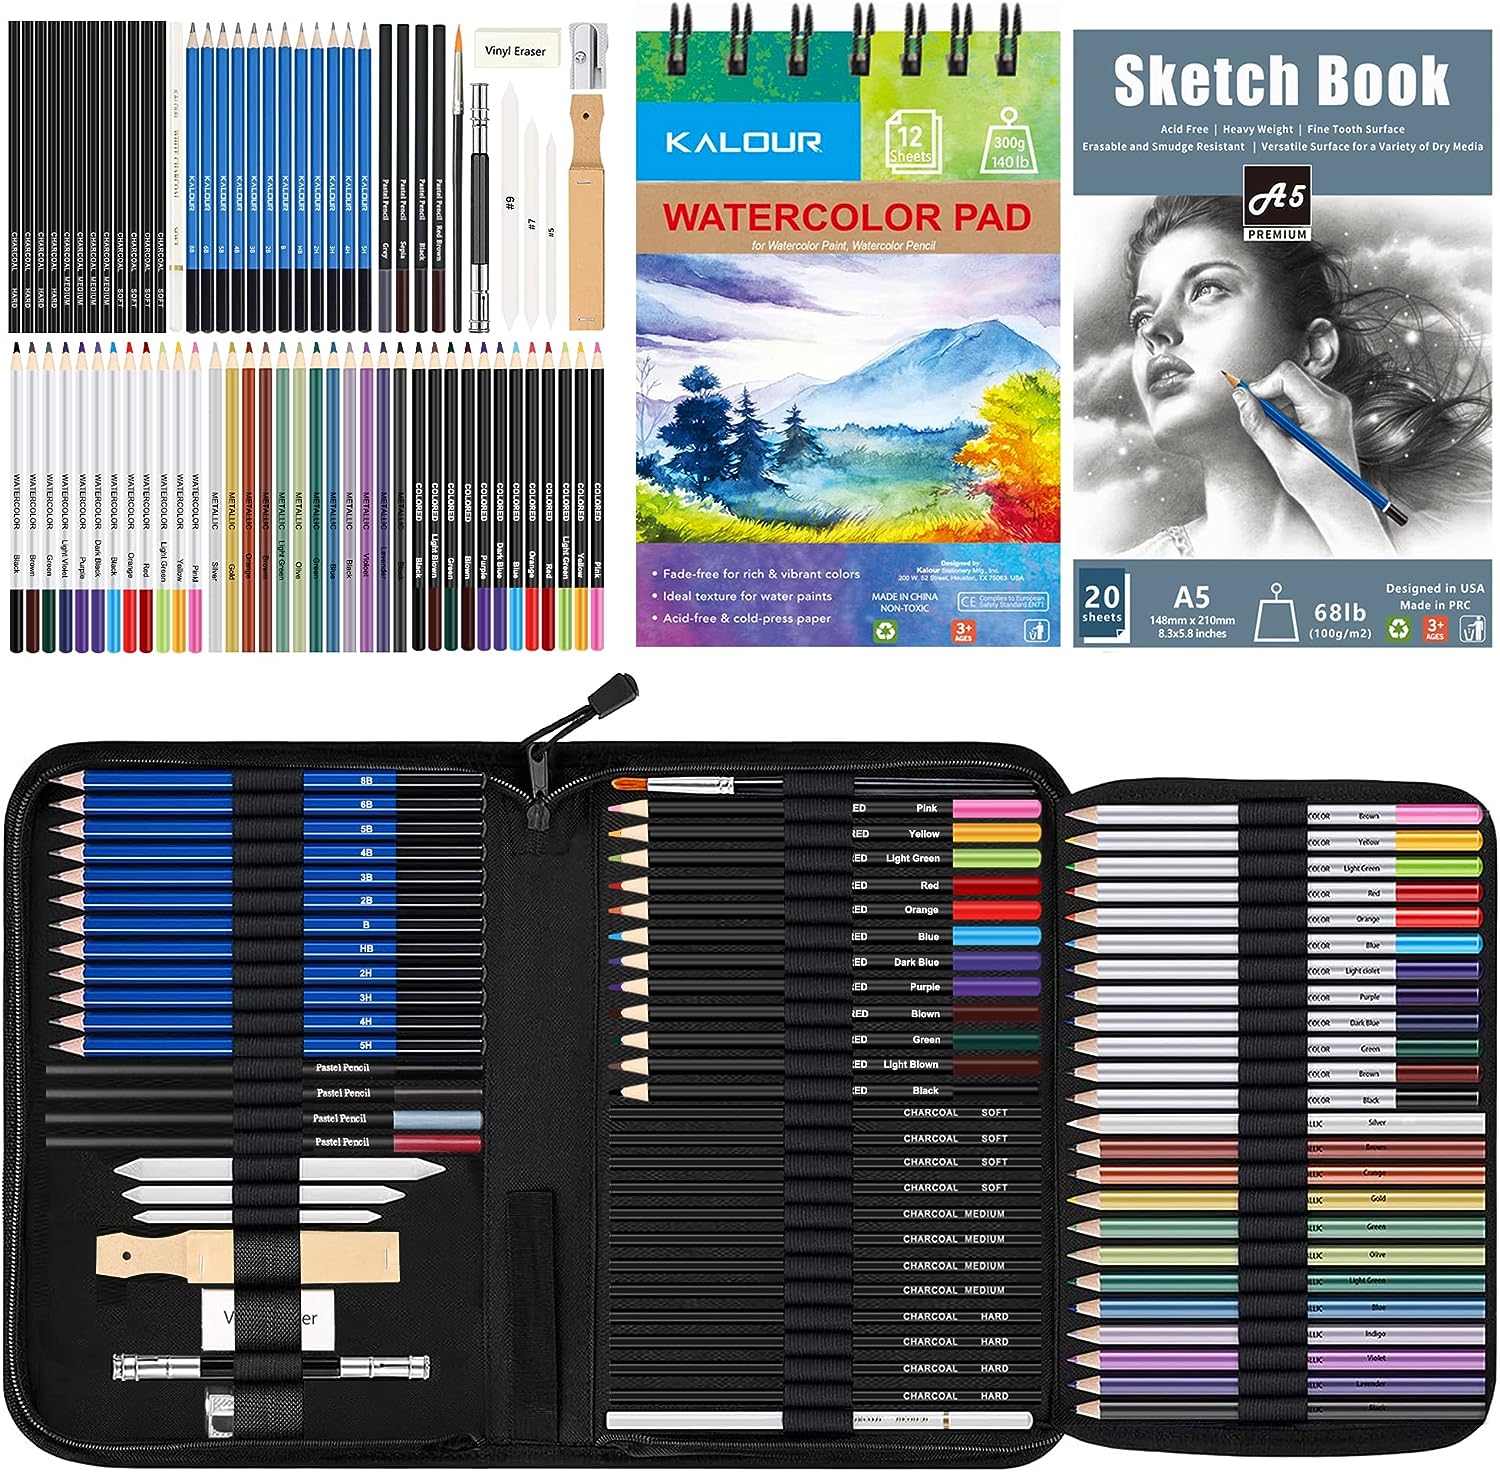 KALOUR 76 Drawing Sketching Kit Set - Pro Art Supplies with Sketchbook & Watercolor Paper - Include Tutorial,Pastel,Watercolor,Sketch,Colored,Metallic